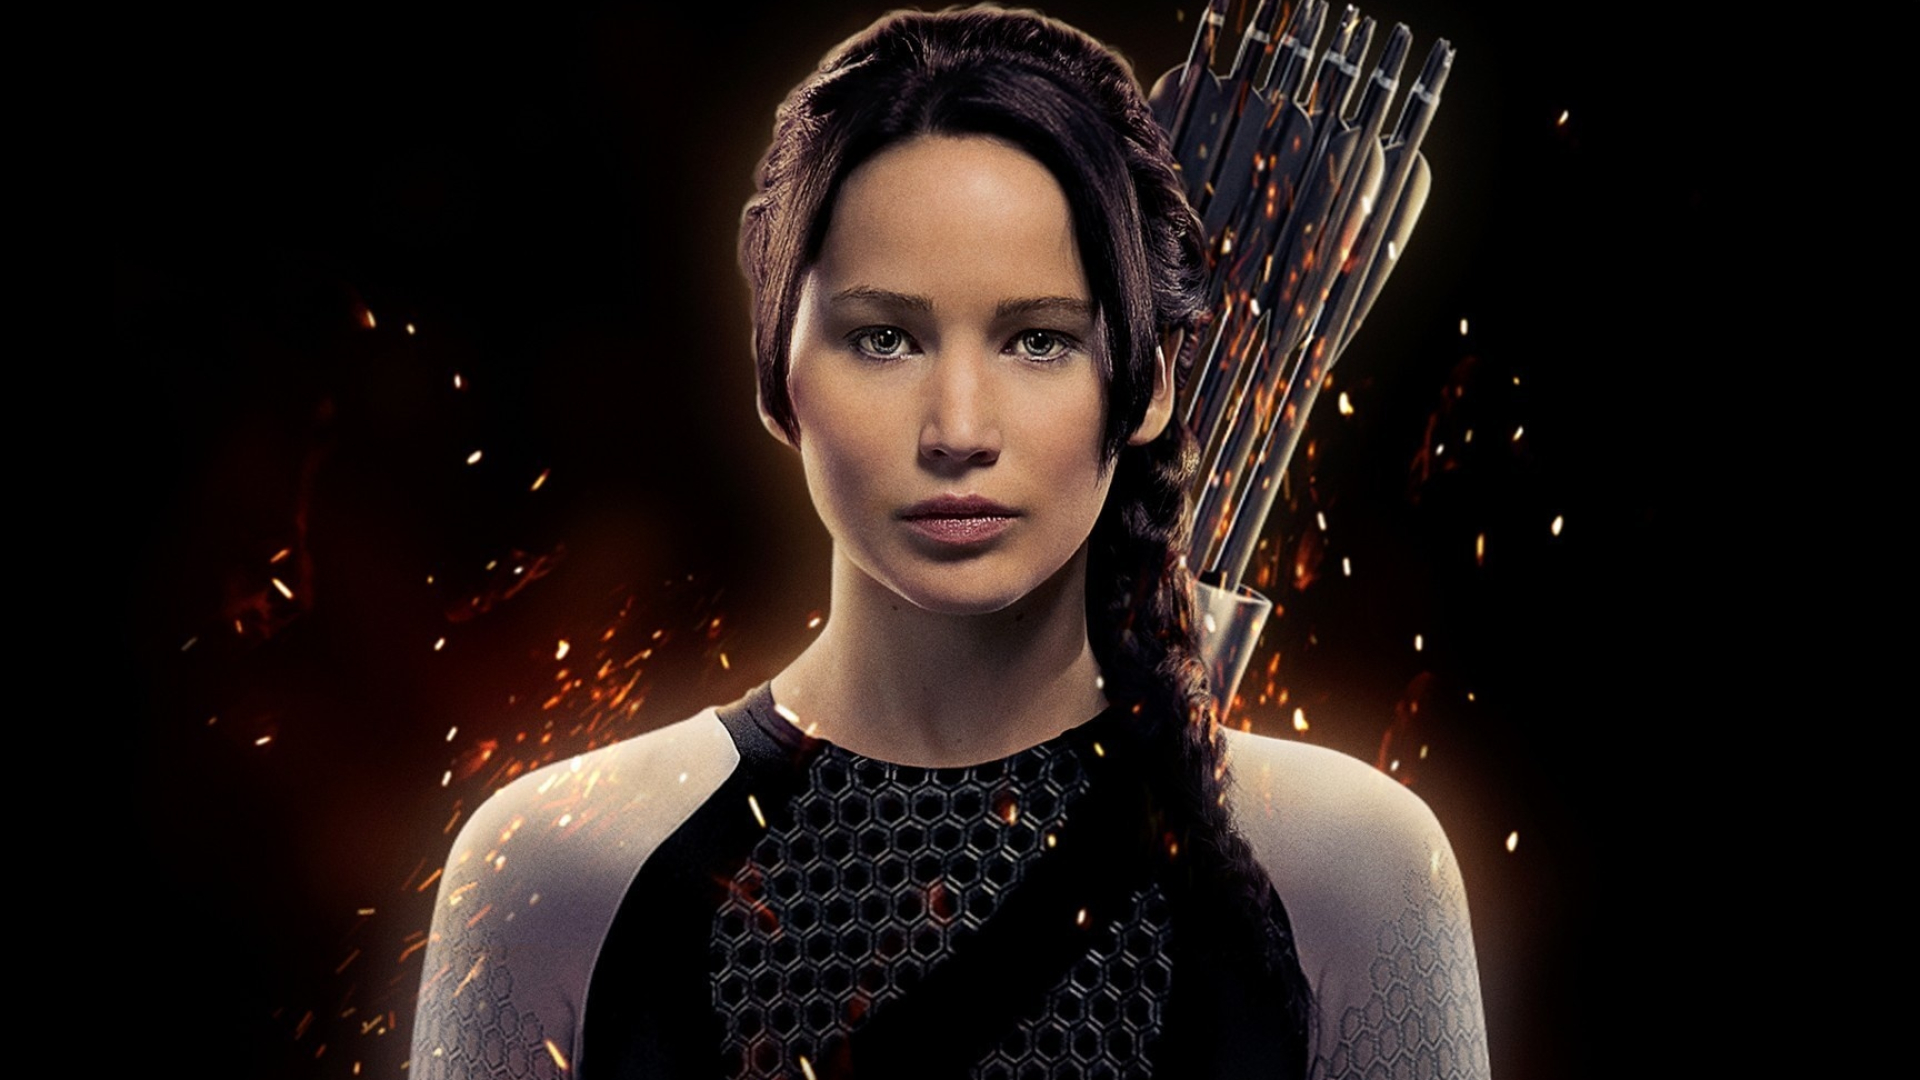 Hunger Games: Katniss Everdeen, Catching Fire, The film premiered in London on November 11, 2013. 1920x1080 Full HD Background.